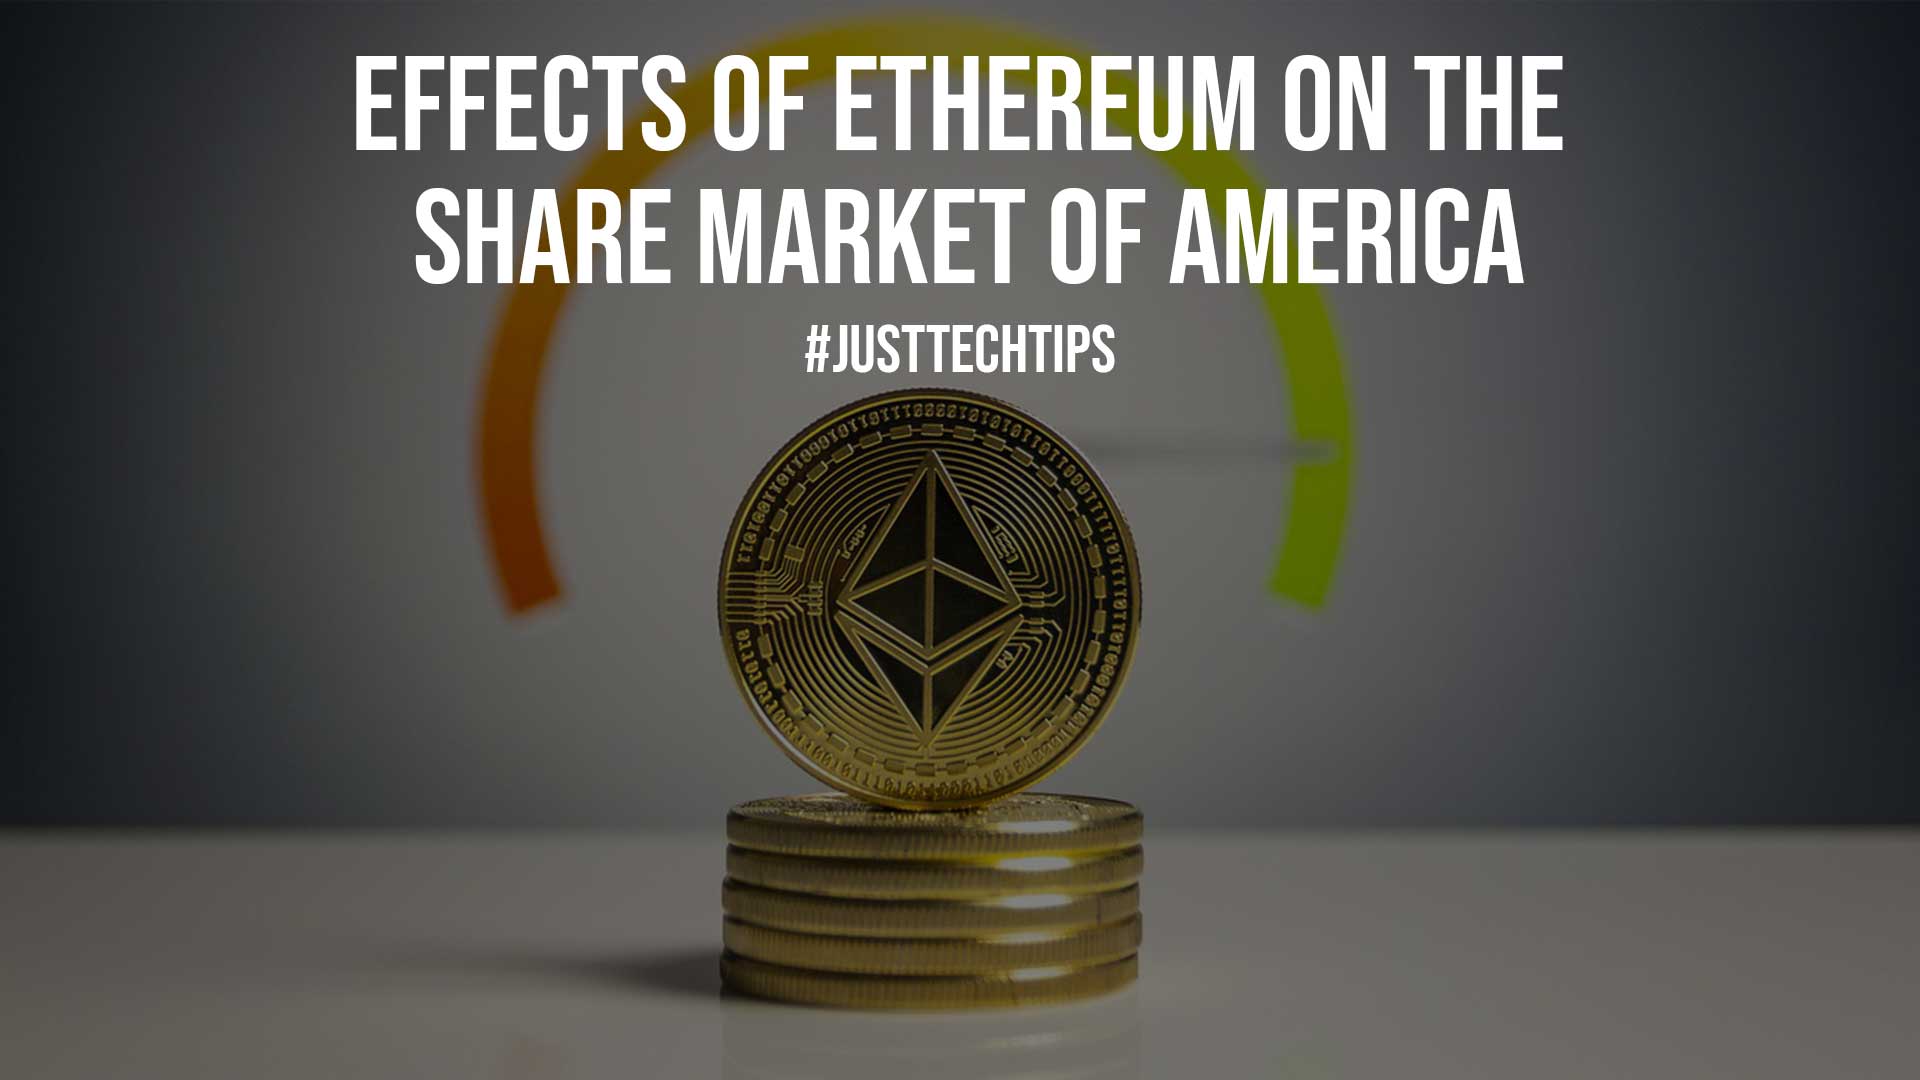 Effects of Ethereum on the Share Market of America